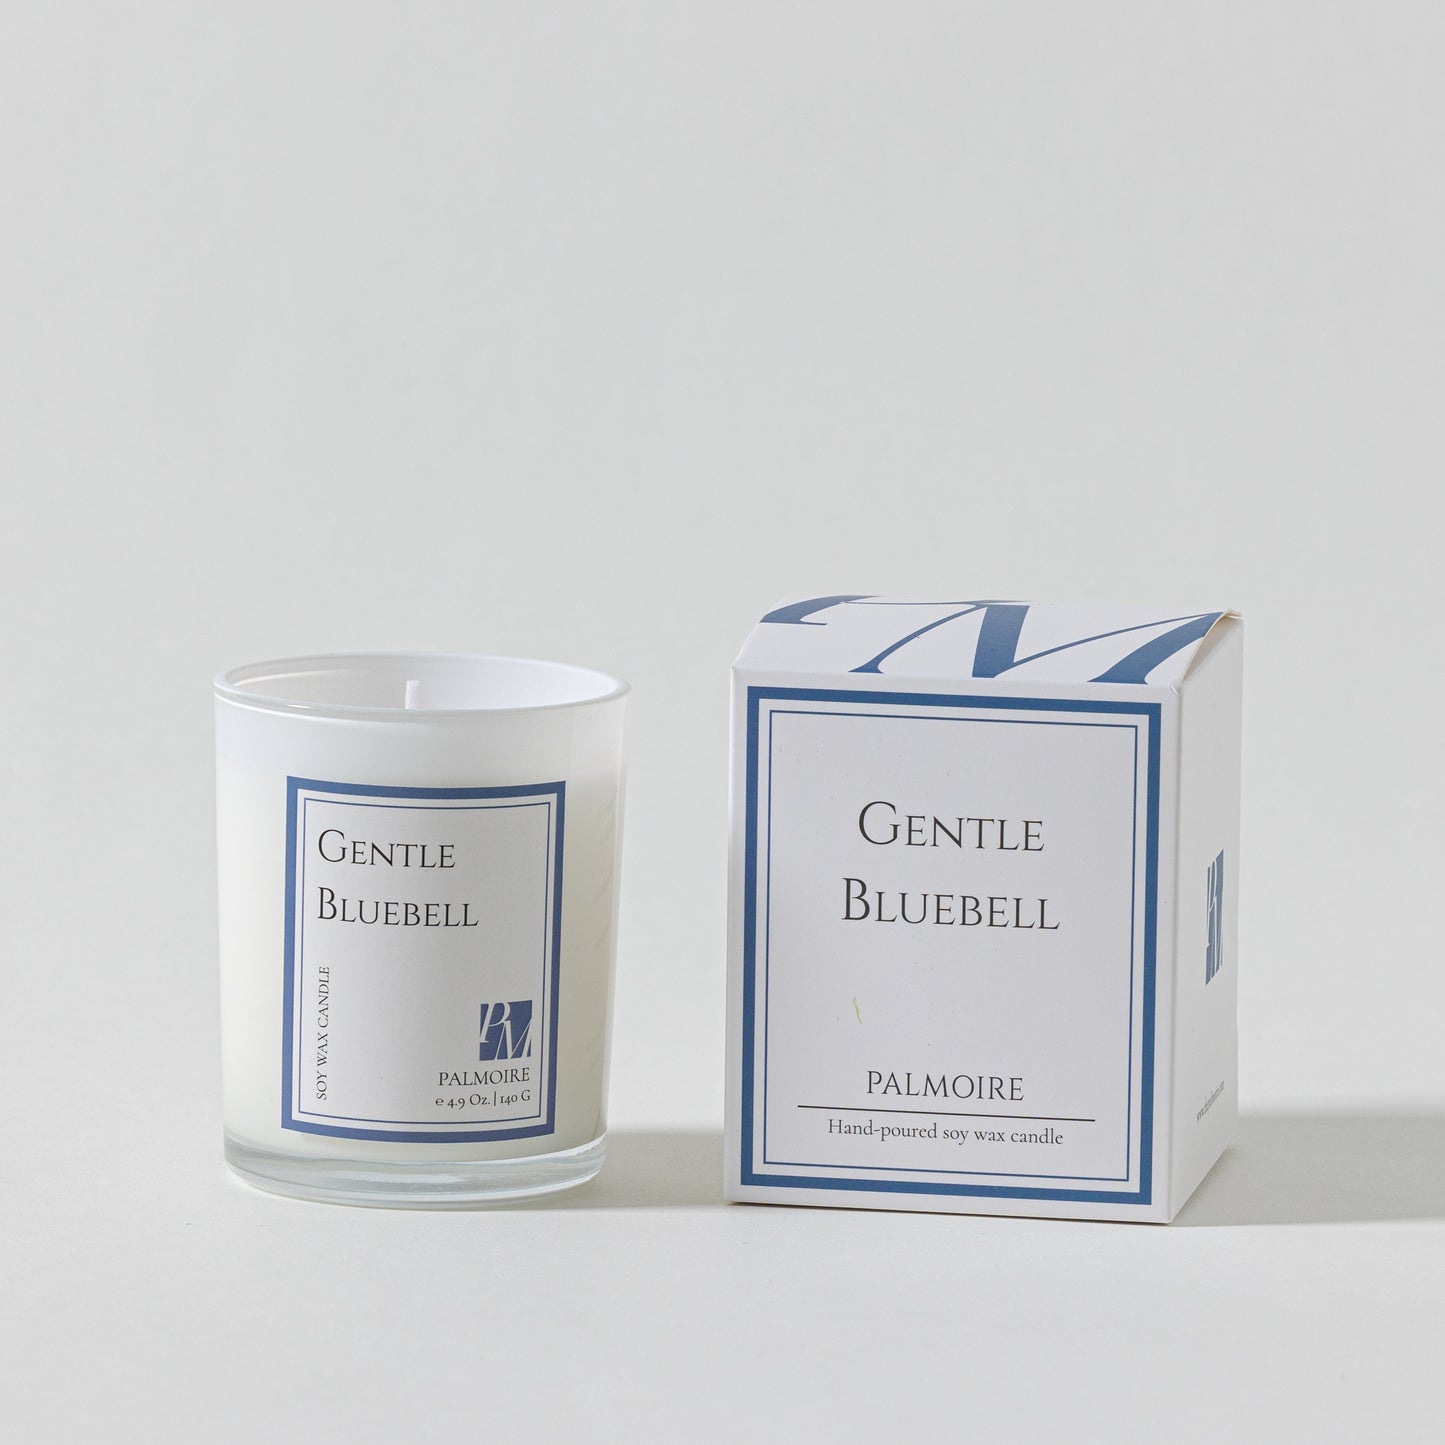 Gentle Bluebell Soy Wax Candle - PALMOIRE